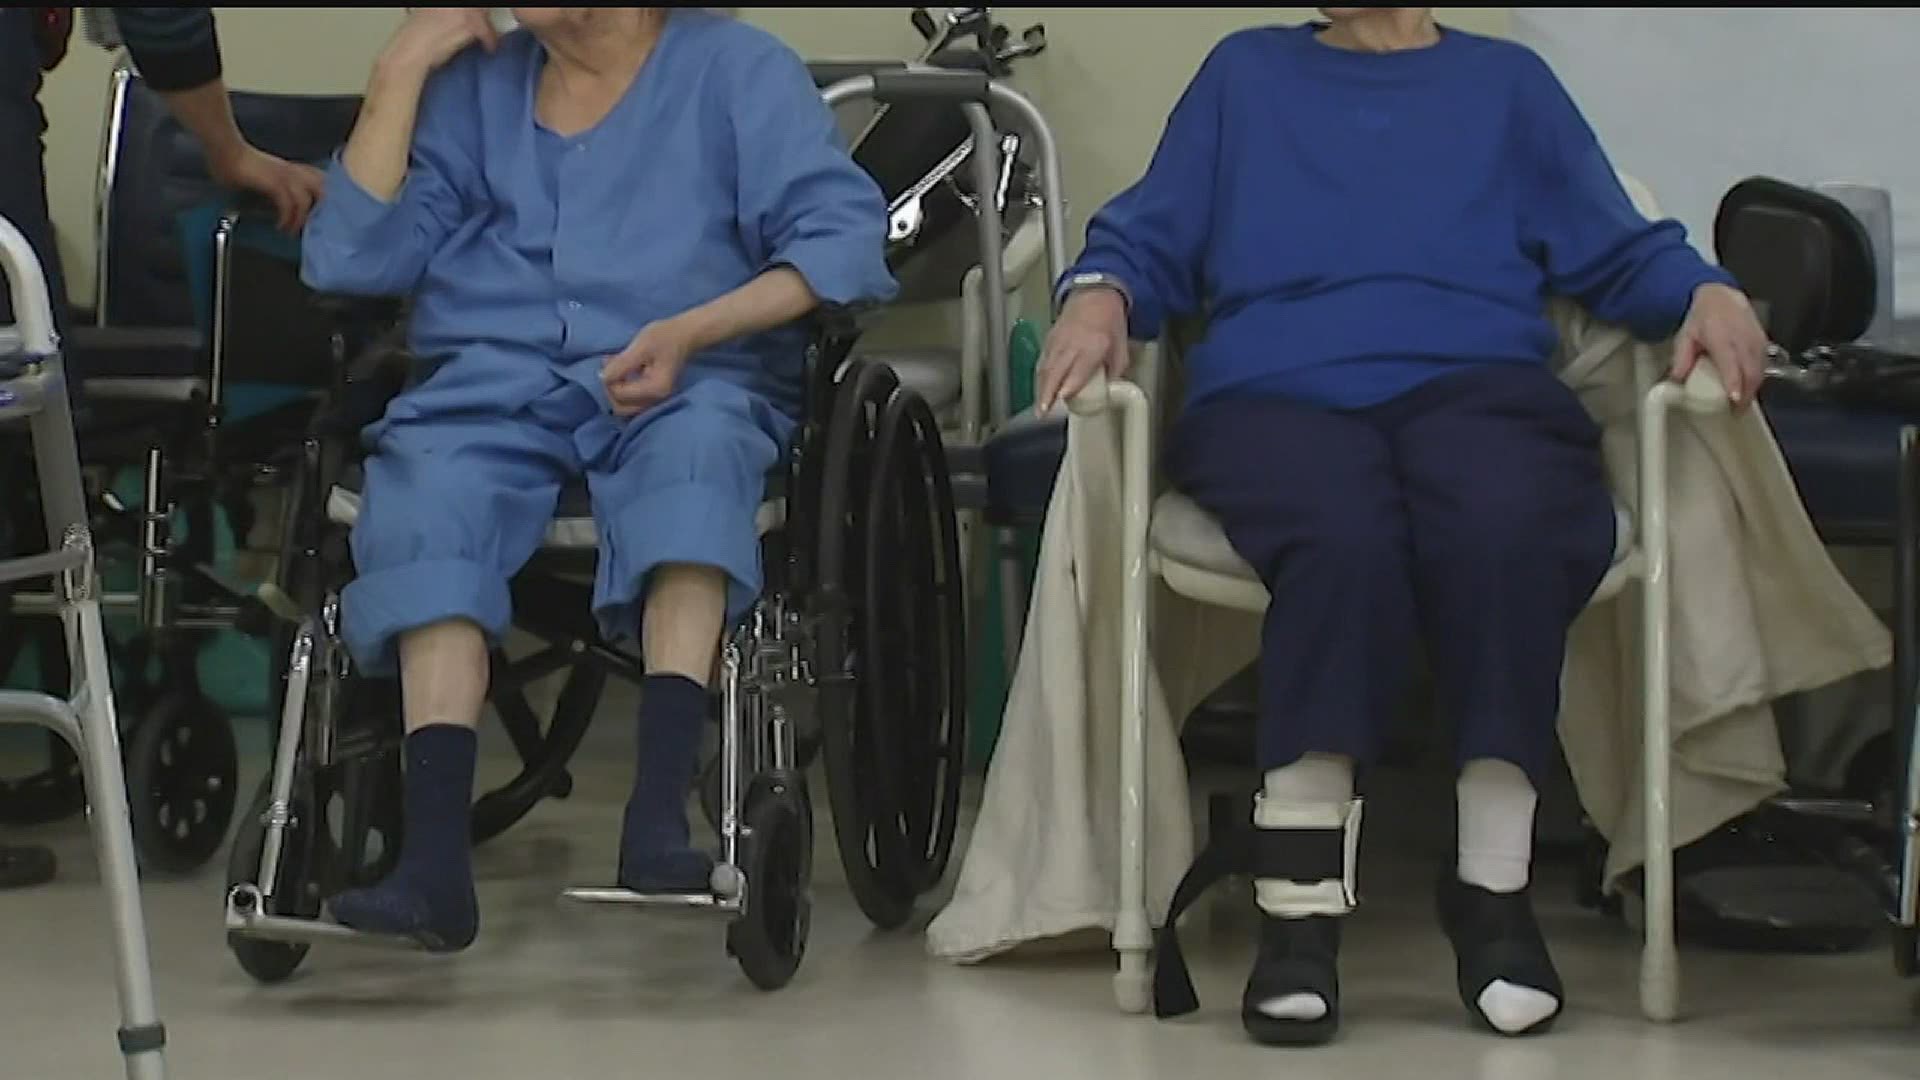 The American Health Care Association claims nursing homes can't shoulder the costs without state and federal funding.